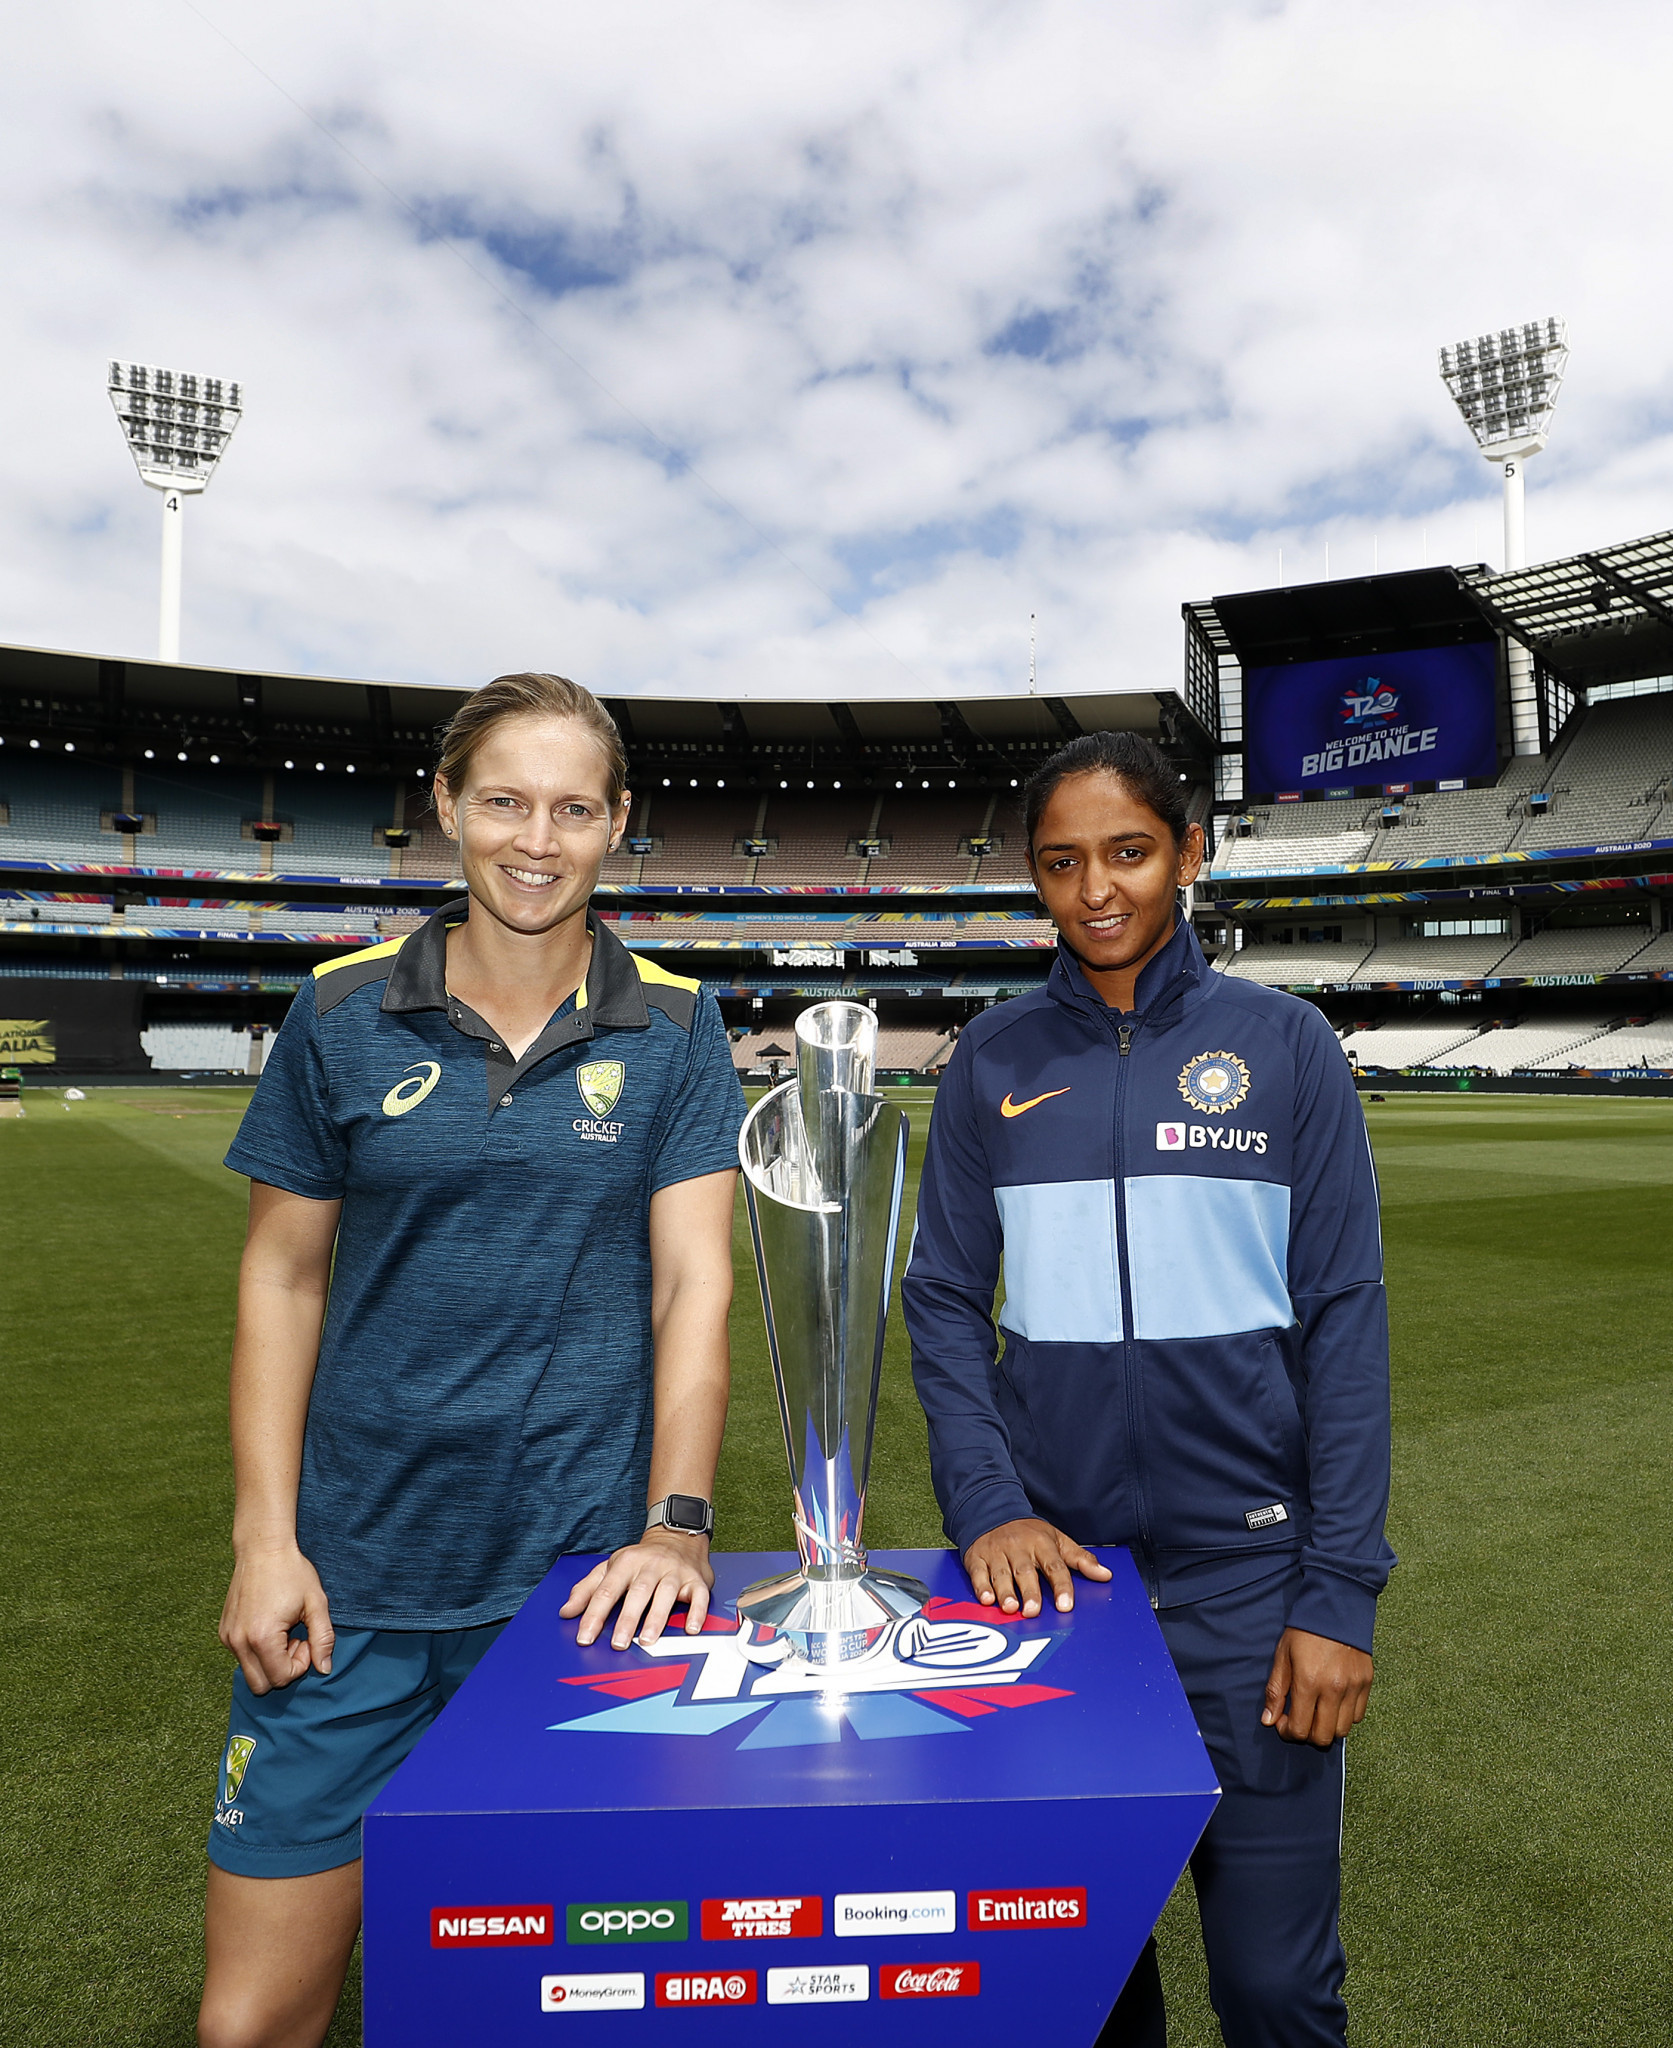 Record crowd expected for ICC Women's T20 World Cup final on International Women's Day